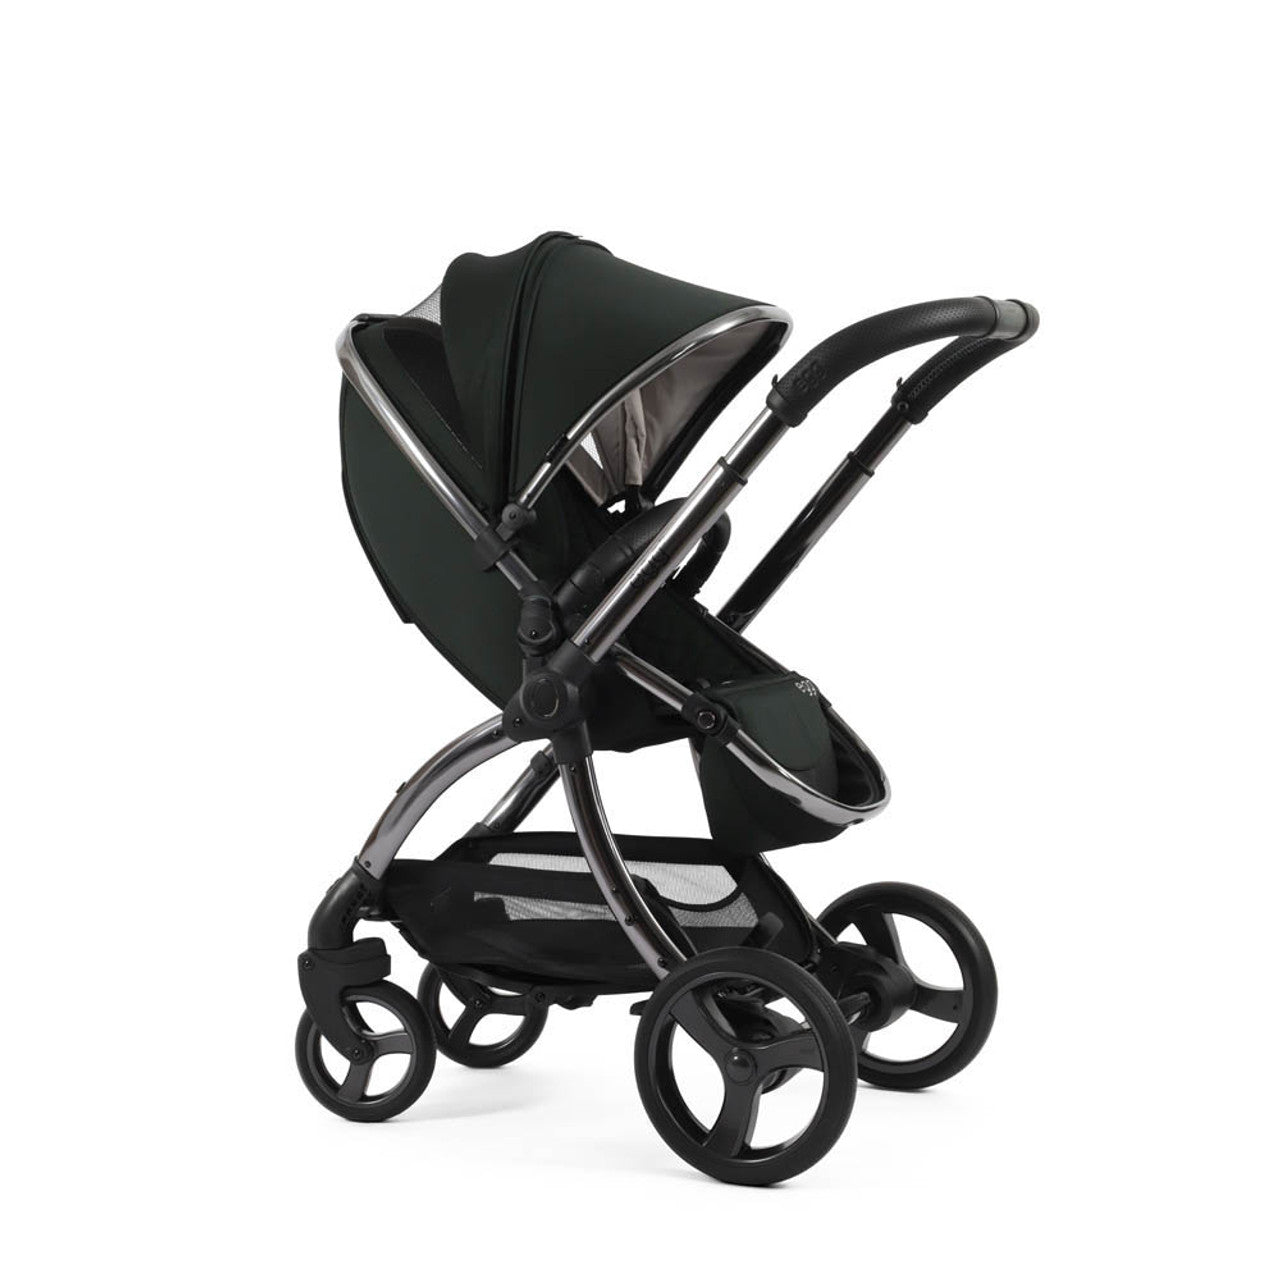 Egg® 3 Luxury Shell i-Size Travel System Bundle - Black Olive -  | For Your Little One